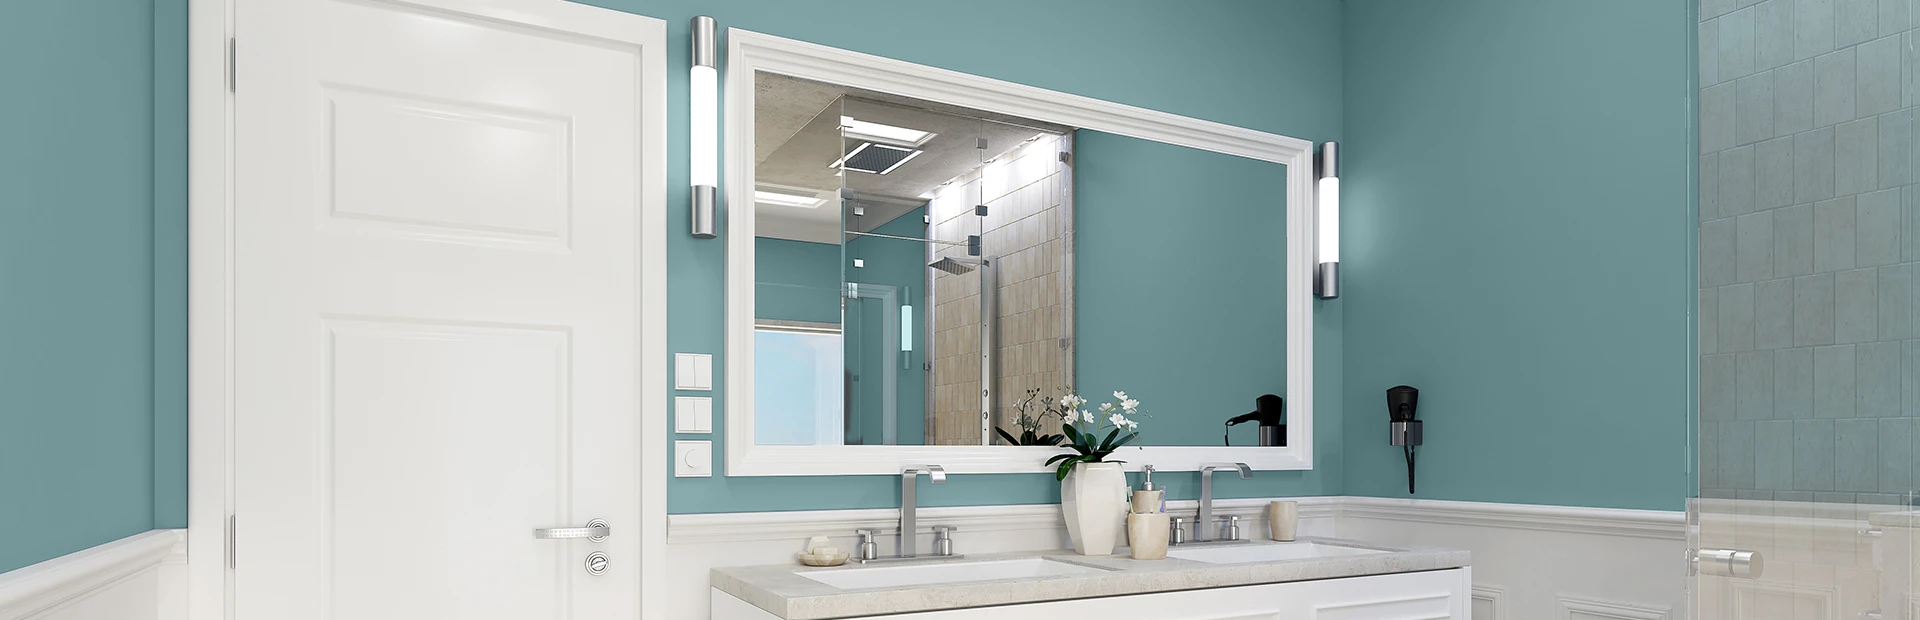 Bathroom in seafoam green, light gray, and white walls.